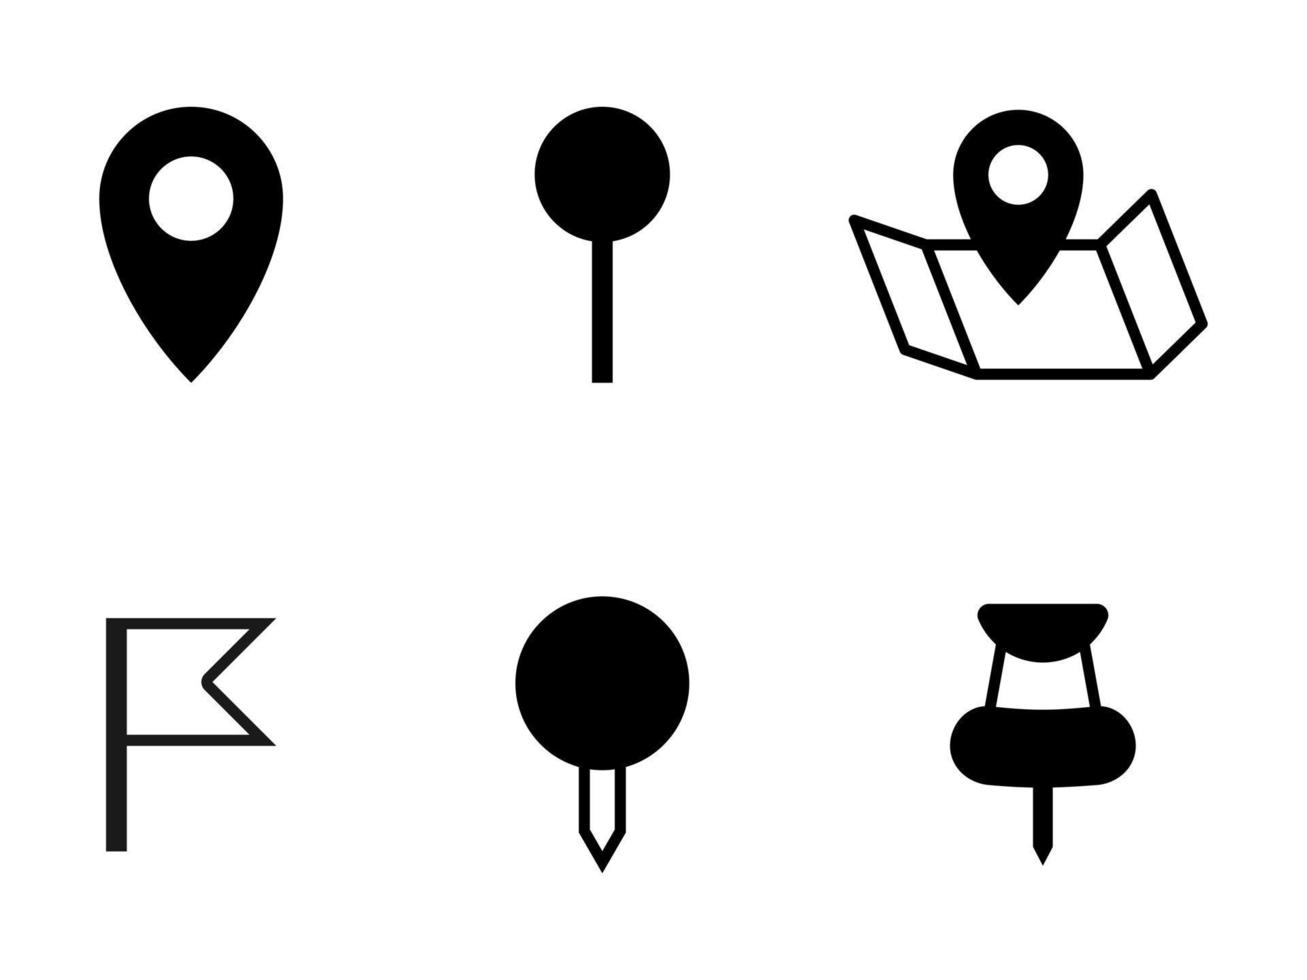 Location pin collection. Pointer icon for pin on the map to show the location. Vector resources